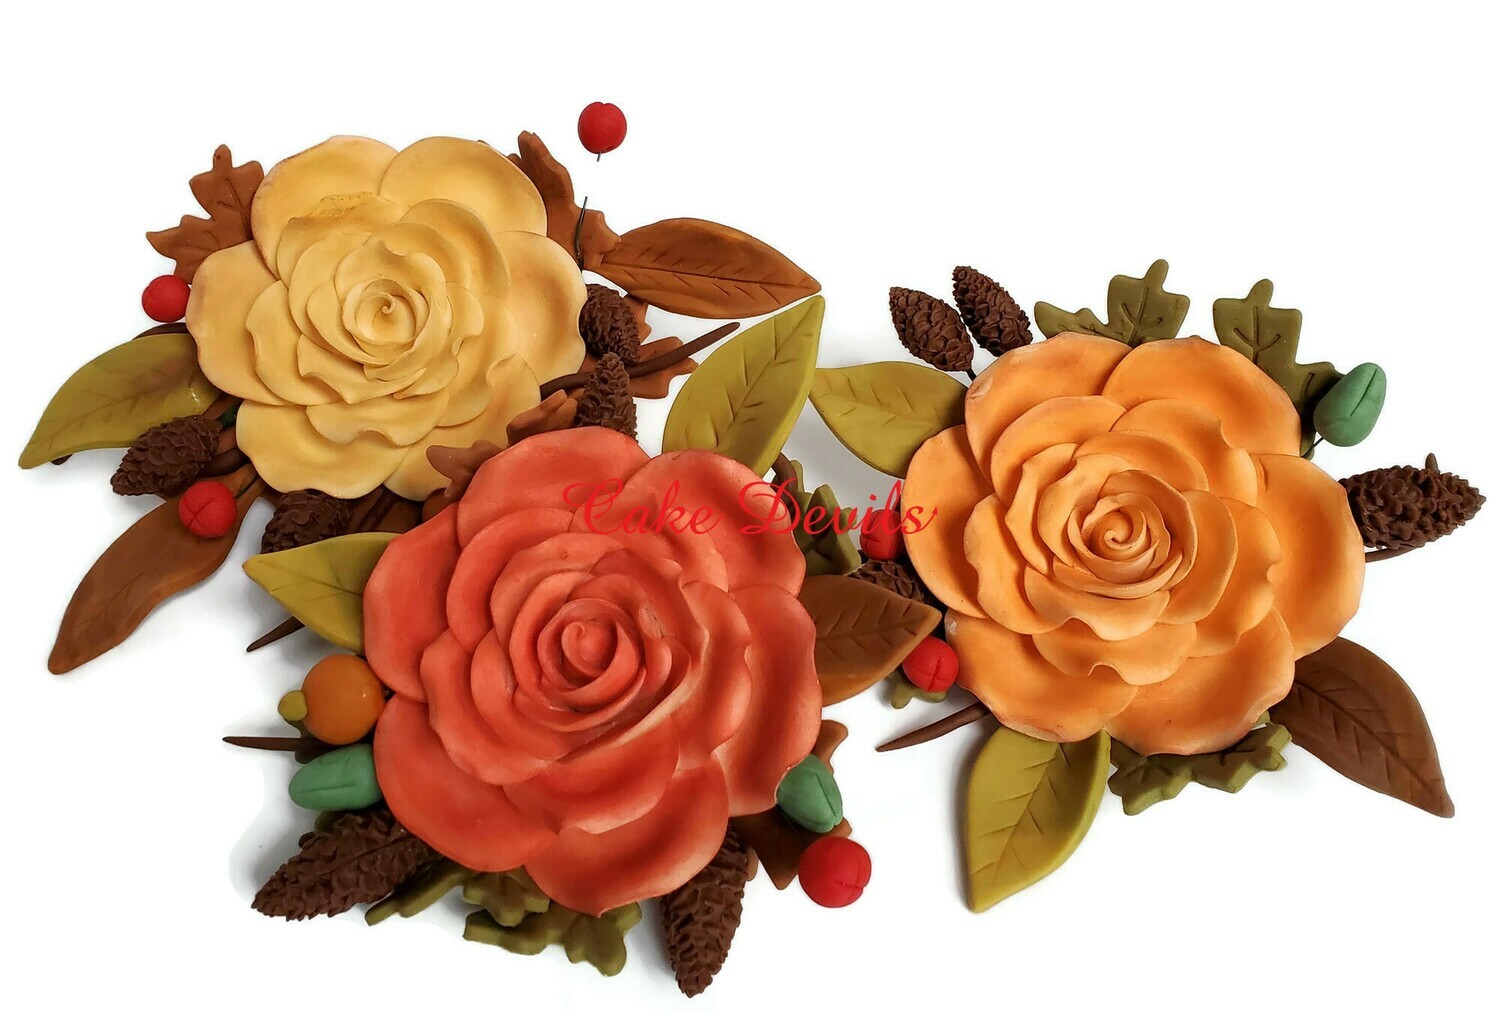 Fall Rose Spray Wedding Cake Toppers with fondant pine cones, leaves, and berries